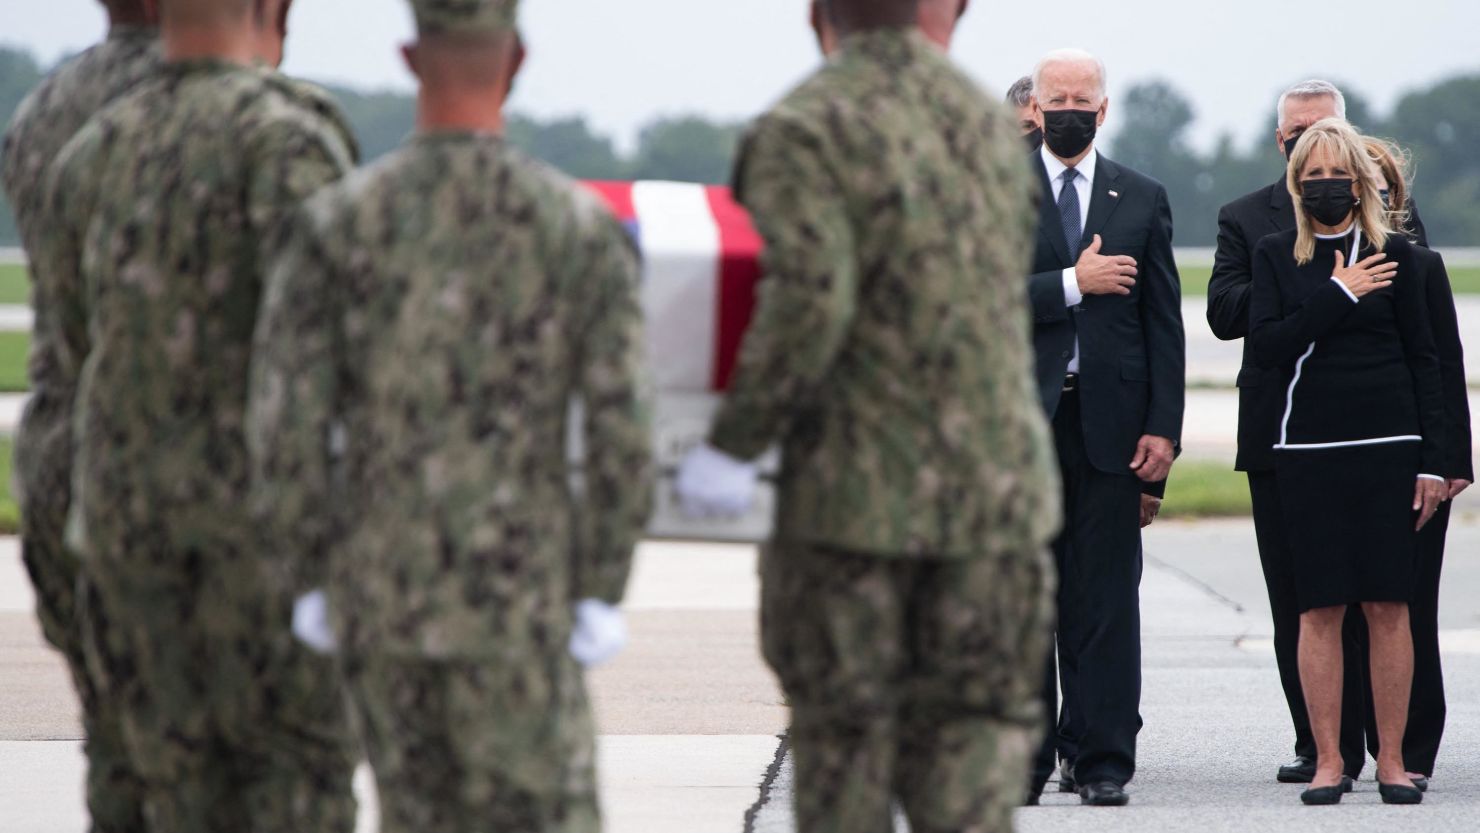 US President Joe Biden, US First Lady Jill Biden, and other officials, attends the dignified transfer of the remains of fallen service members at Dover Air Force Base in Dover, Delaware on August 29, 2021.